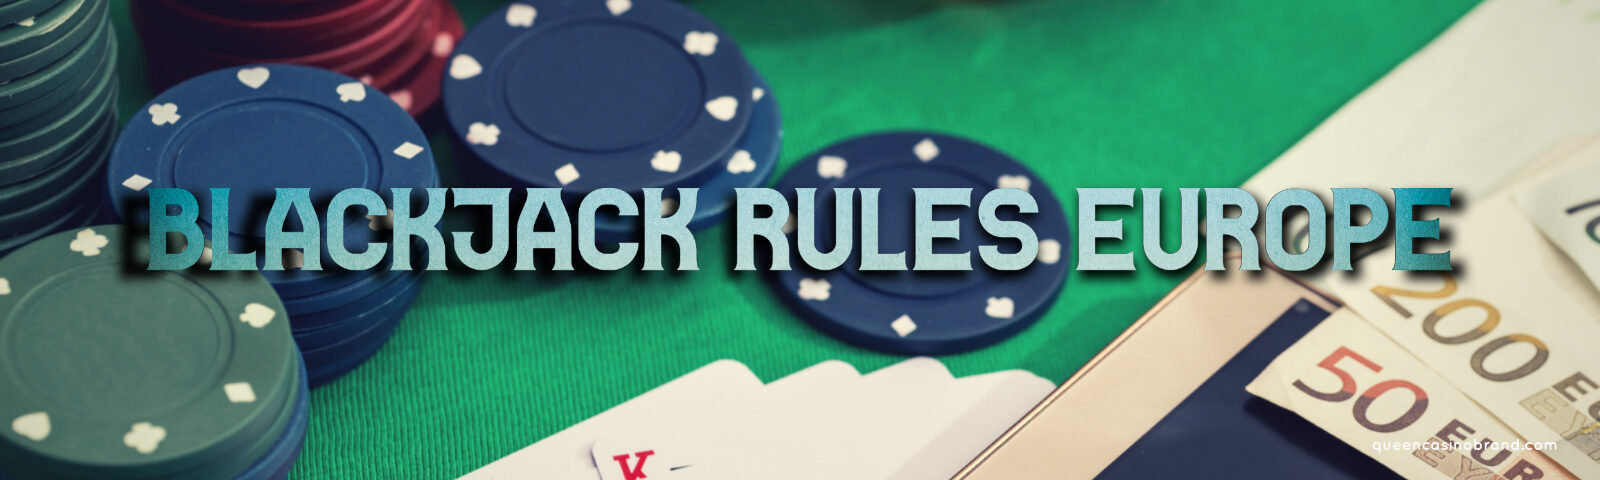 Blackjack Rules Europe What are they? | Queen Casino Brand